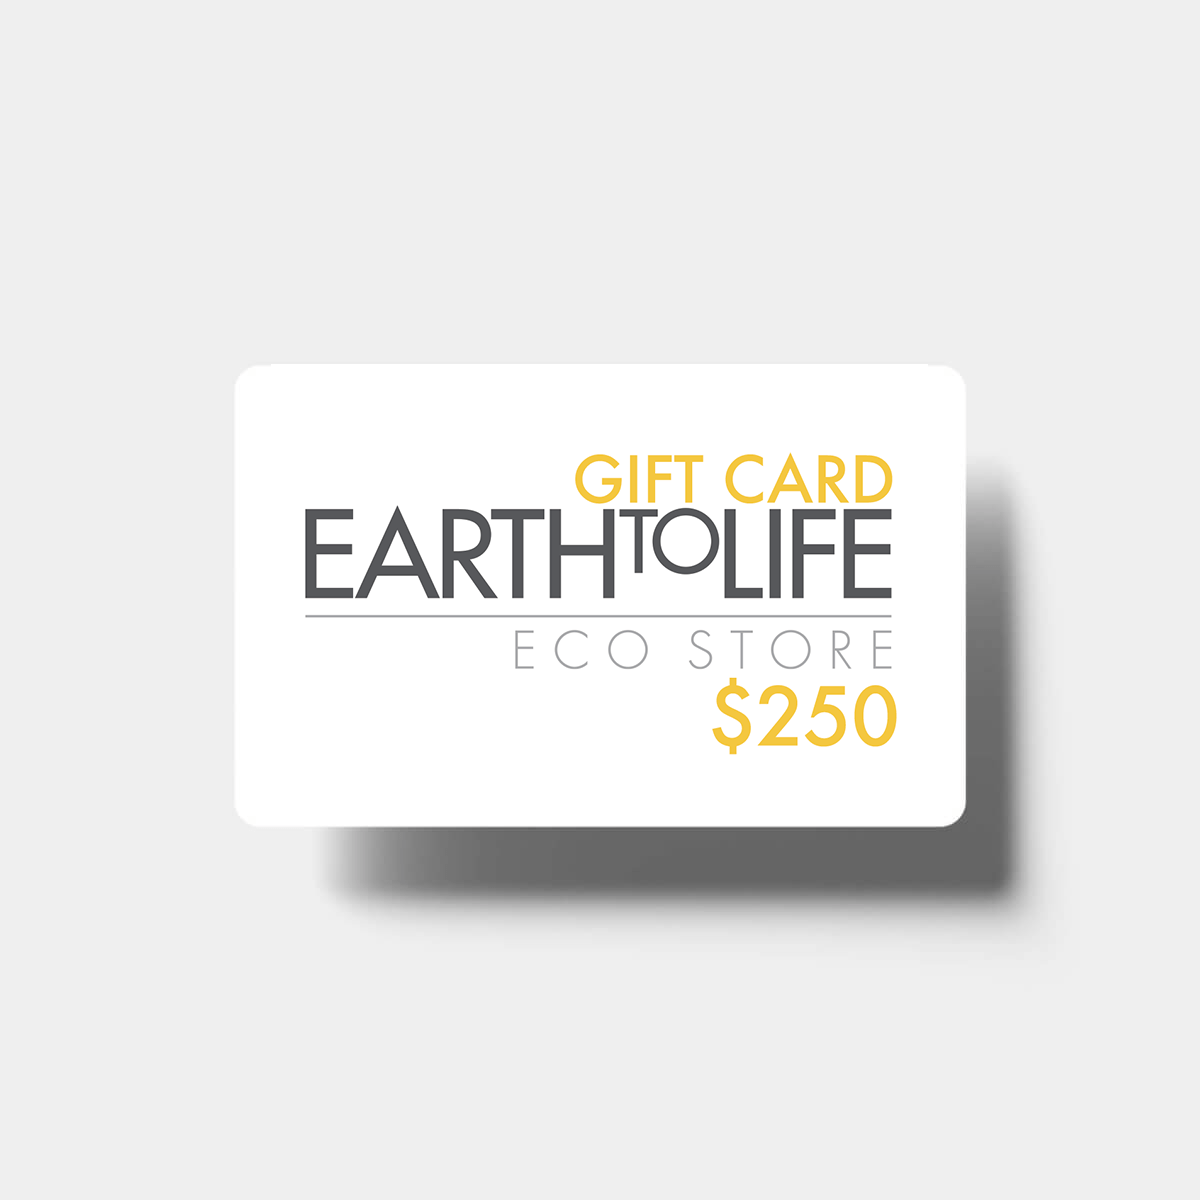 Earth to Life Gift Card Gift Cards Earth to Life $250.00 